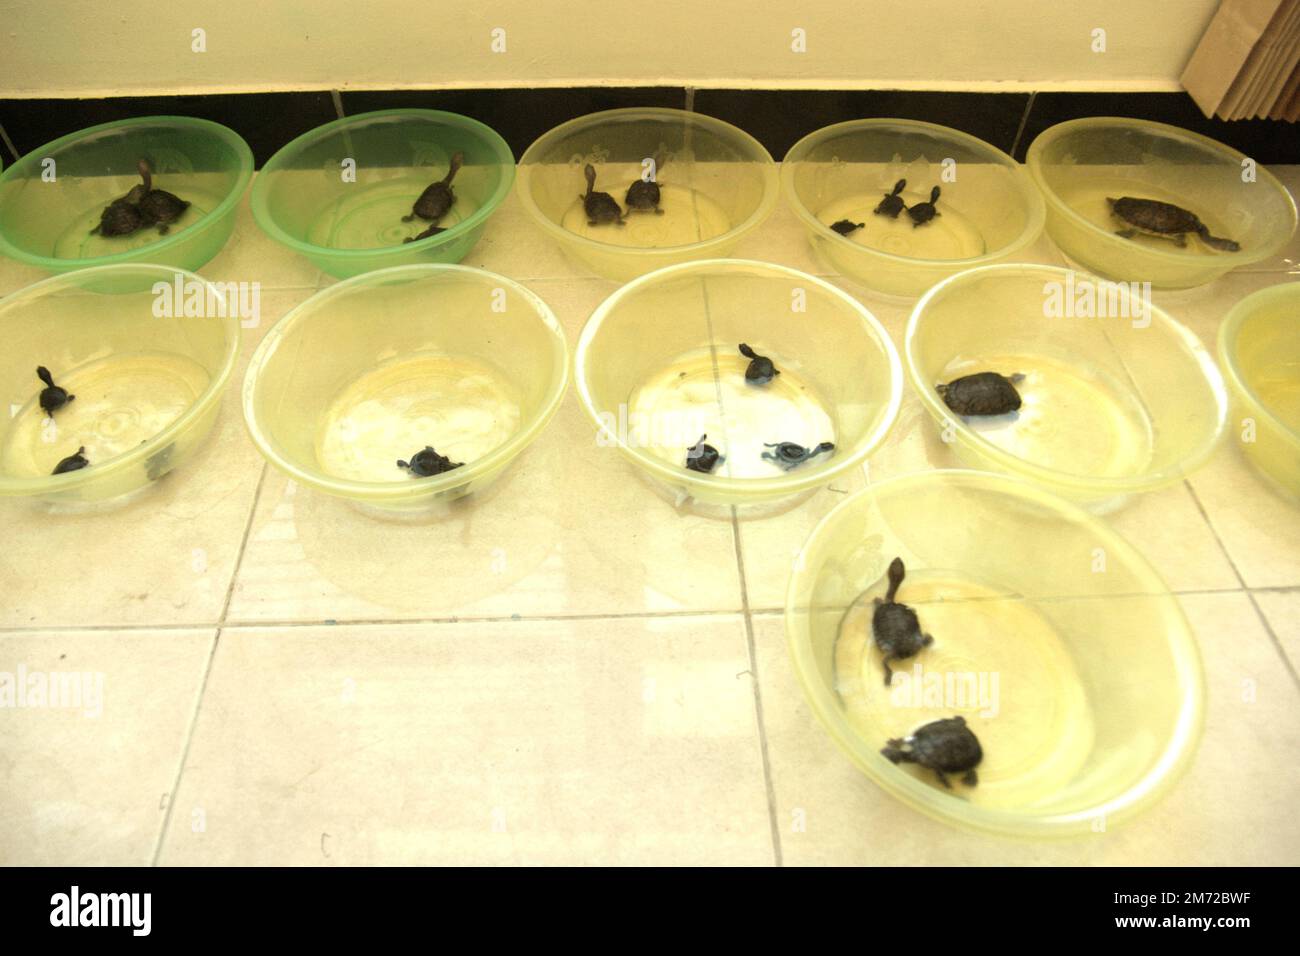 Rote Island's endemic snake-necked turtle (Chelodina mccordi) juveniles are being conditioned at a hotel in Batu Termanu, Central Rote, Rote Ndao, East Nusa Tenggara, Indonesia. Bred in a certified breeding facility in Jakarta and are having a long trip to its home island, the critically endangered freshwater turtles will be released onto Lake Peto, one of their suitable, natural habitats. The species suffers from wildlife trade. Stock Photo